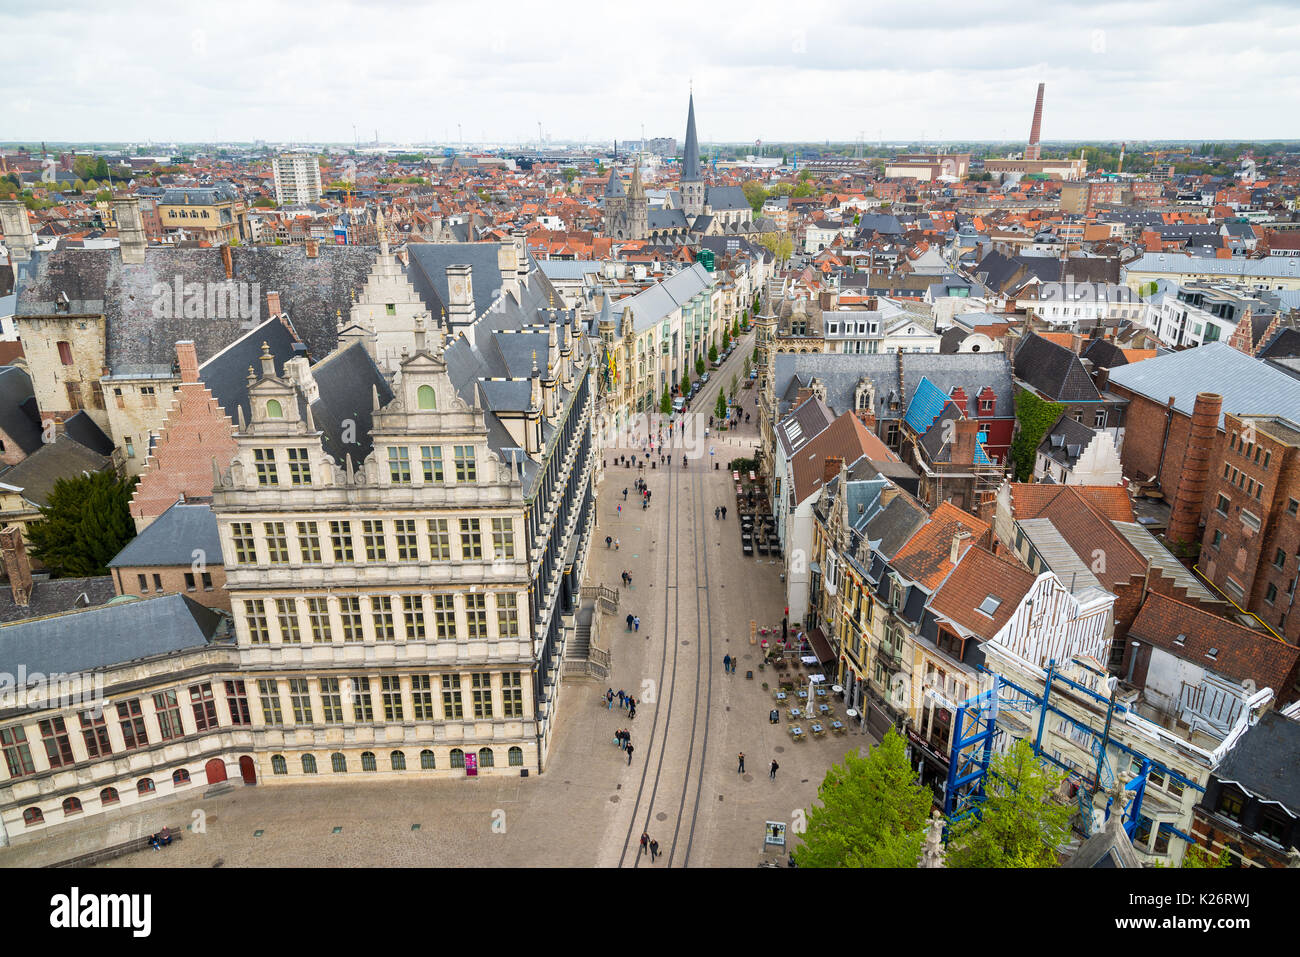 Ghent, Belgium - April 16, 2017: Aerial view of Ghent from Belfry - beautiful medieval buildings of the Old Town, Belgium. Stock Photo